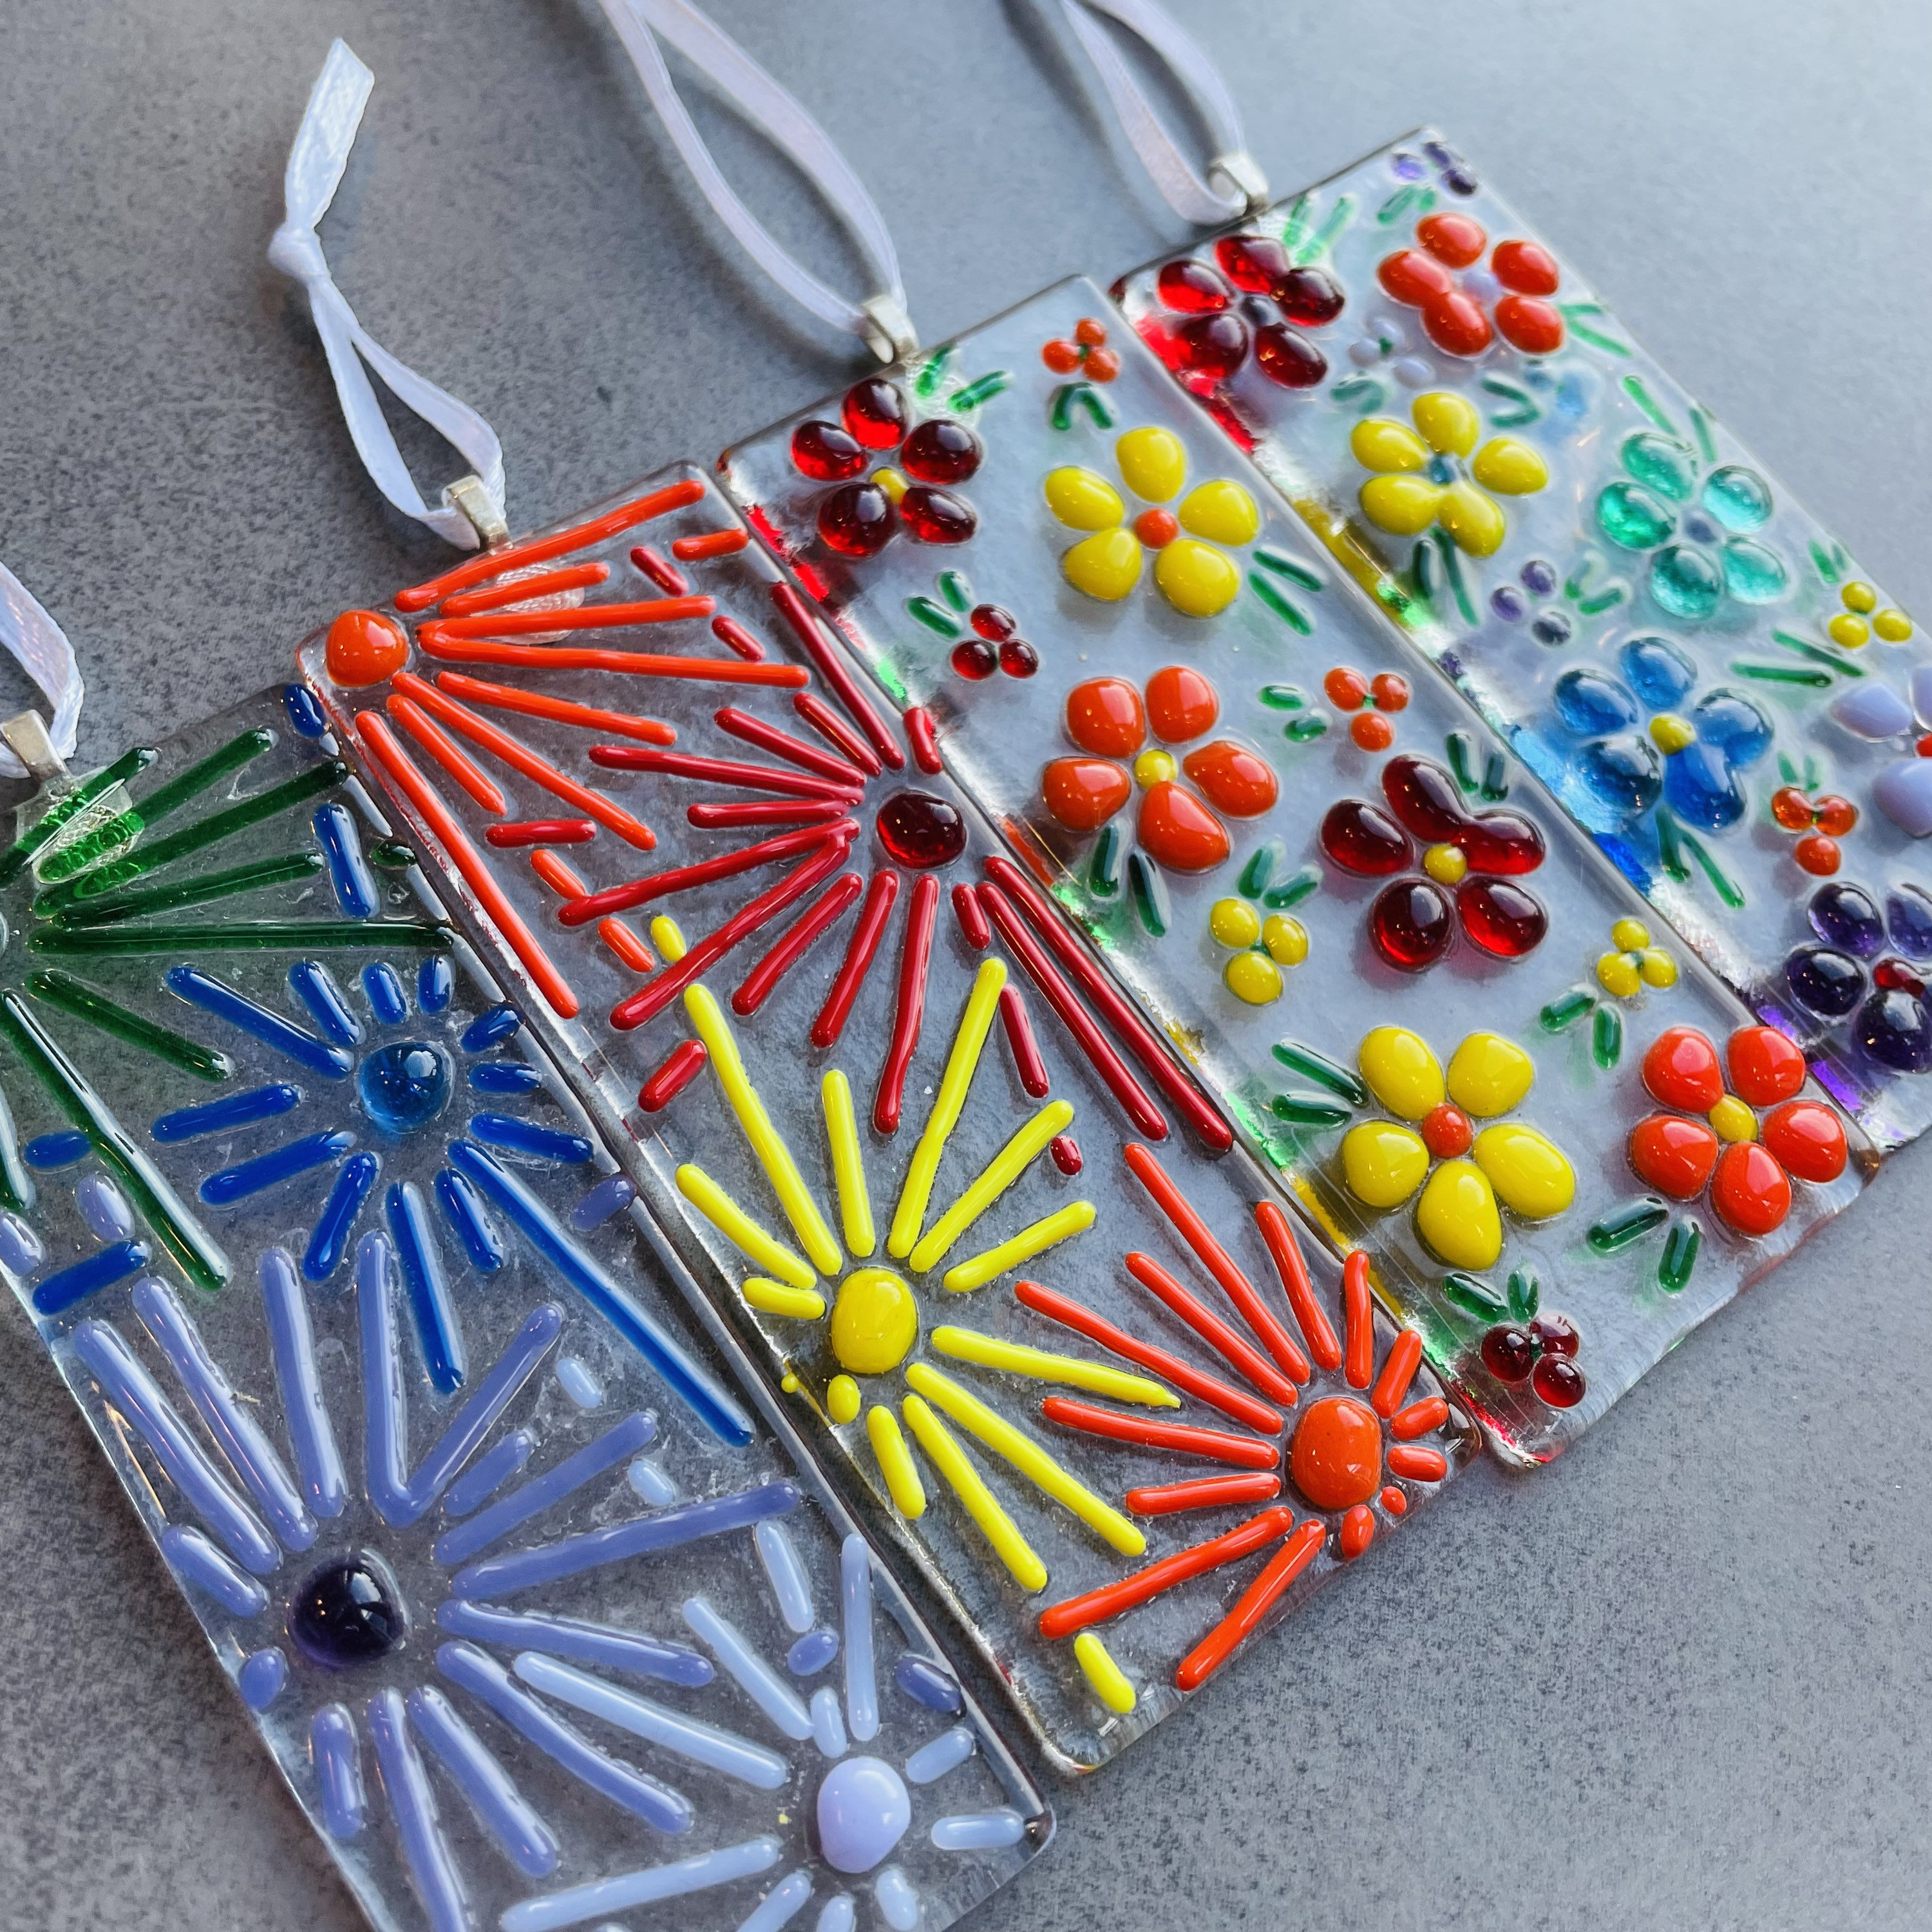 Fused Glass Kit, Craft Kit for Adult, Glass Art Kit, Glass Making Kit,  Glass Kit for Family by Twice Fired, Sun Catcher Multi Colour -  Israel